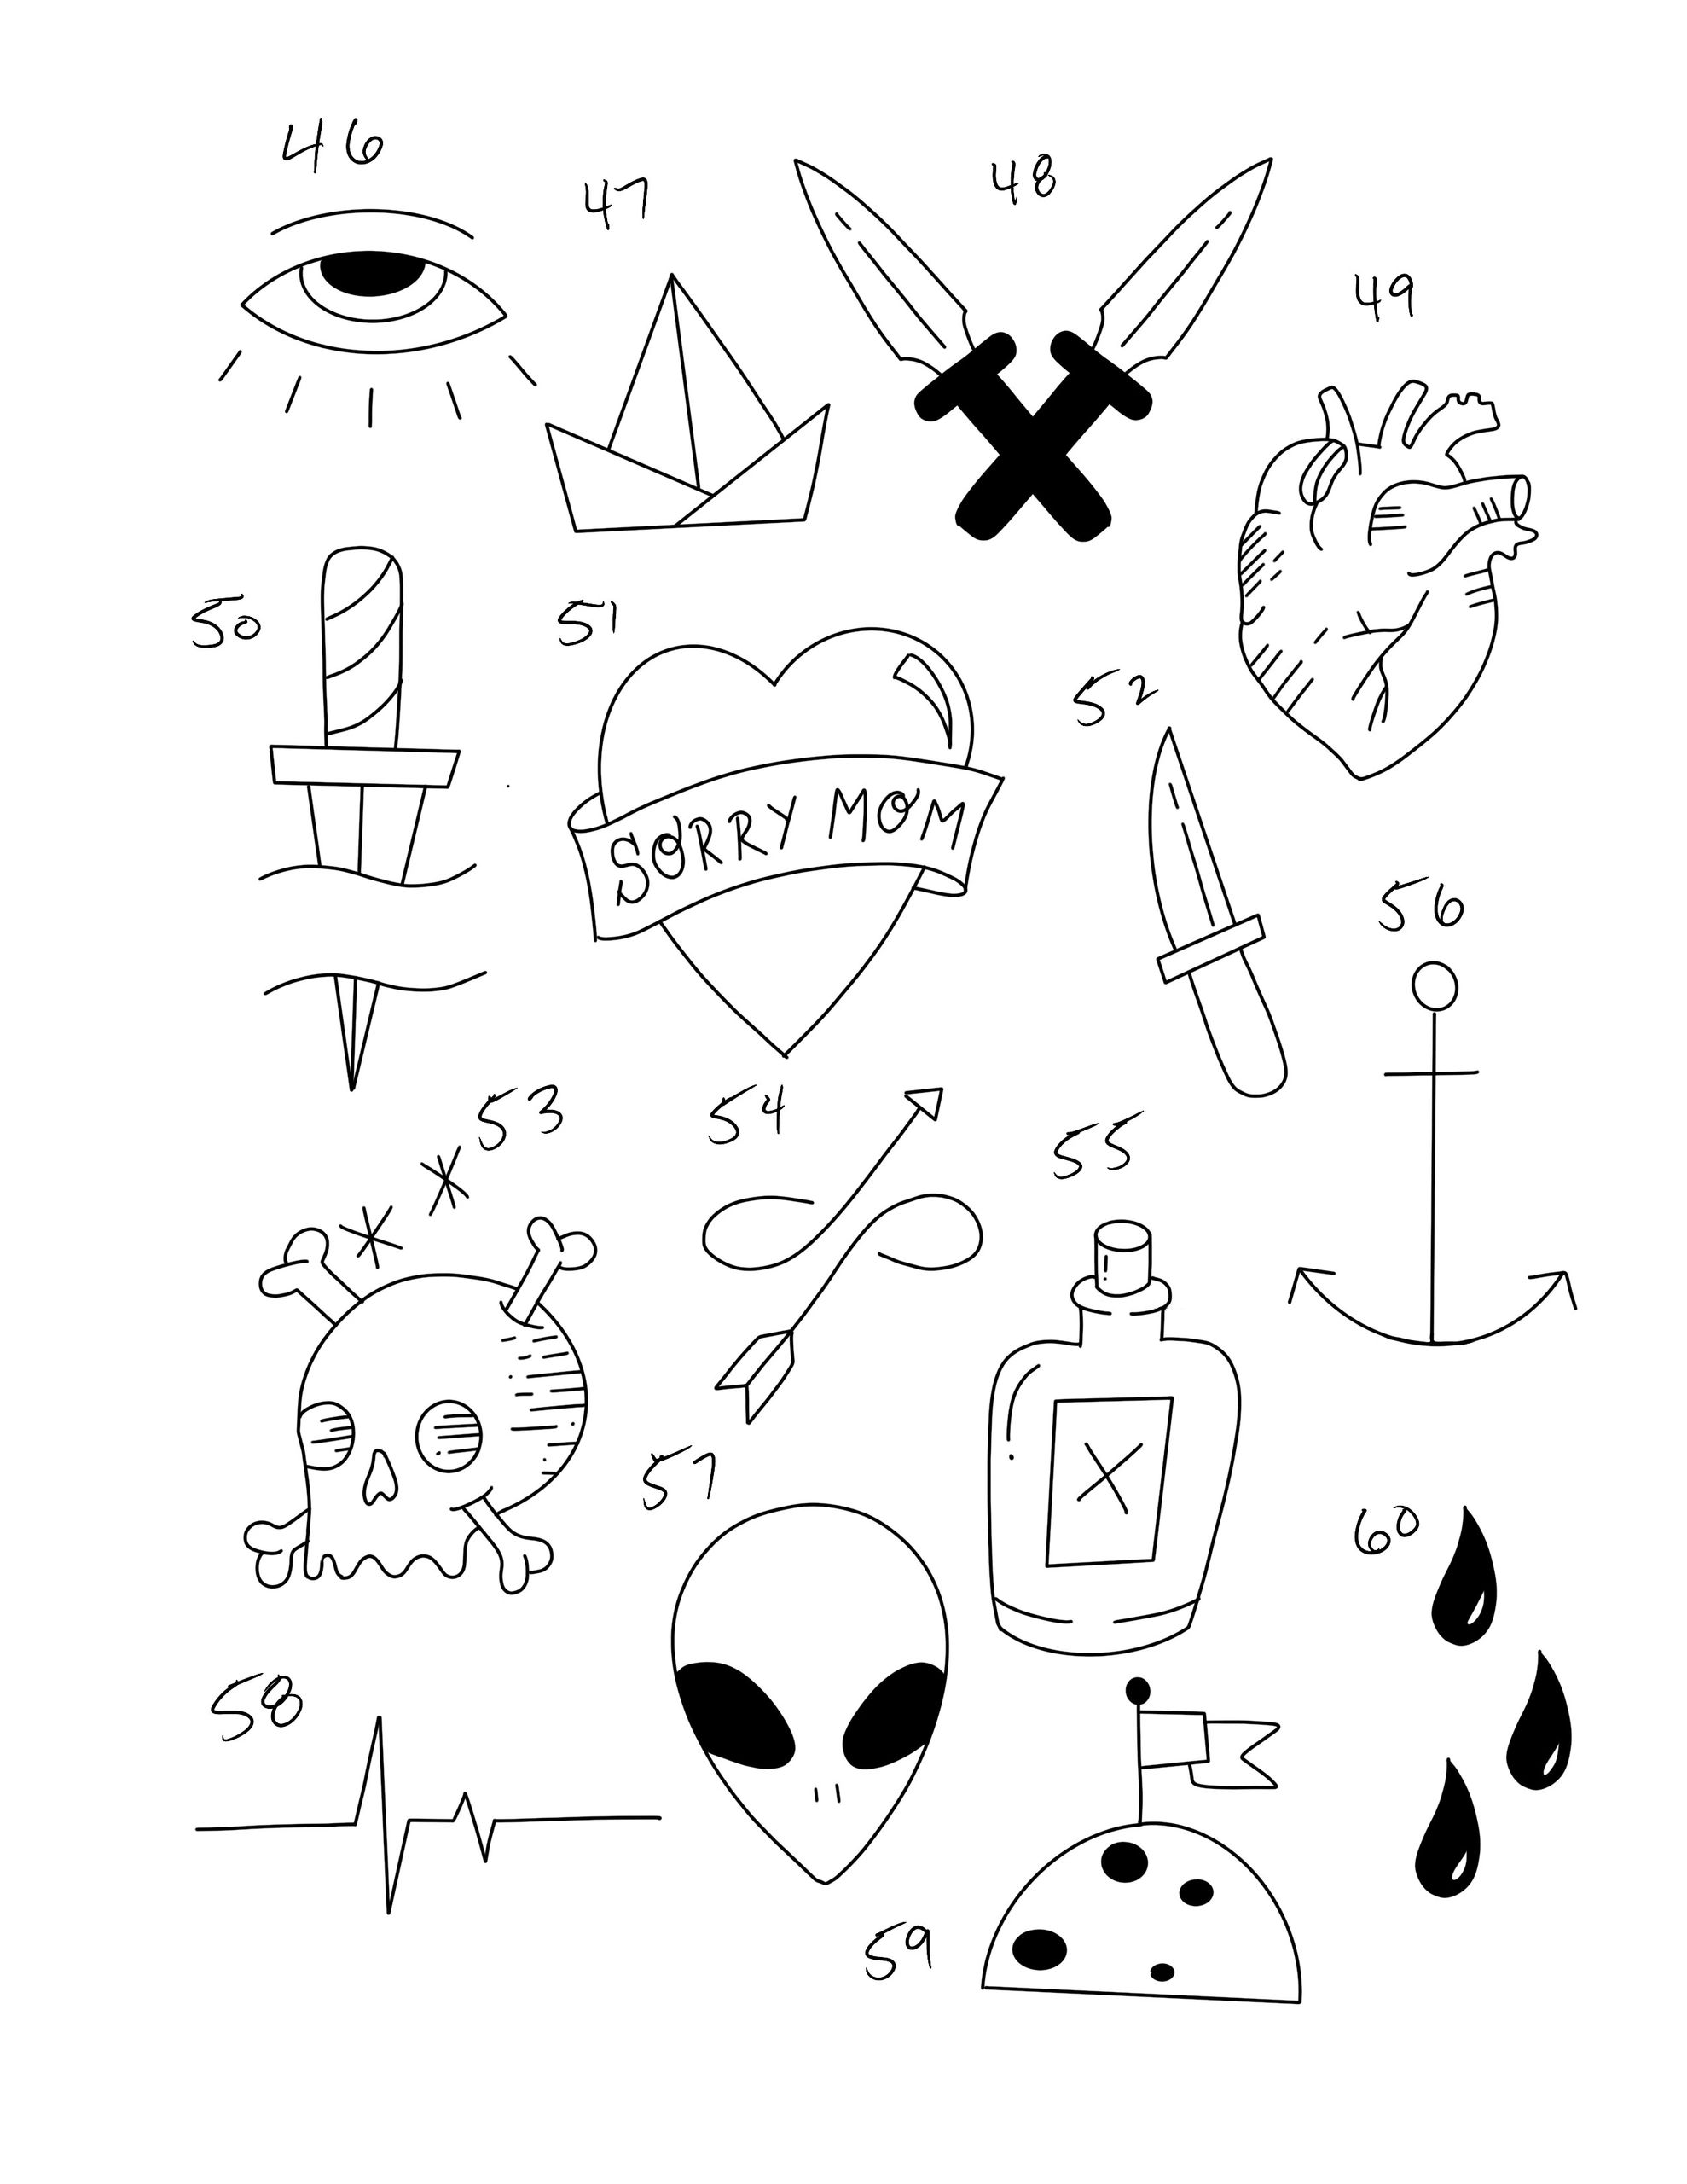 Friday the 13th SPECIAL  Red Hot Tattoo  Friday the 13th tattoo Friday  the 13th Flash tattoo